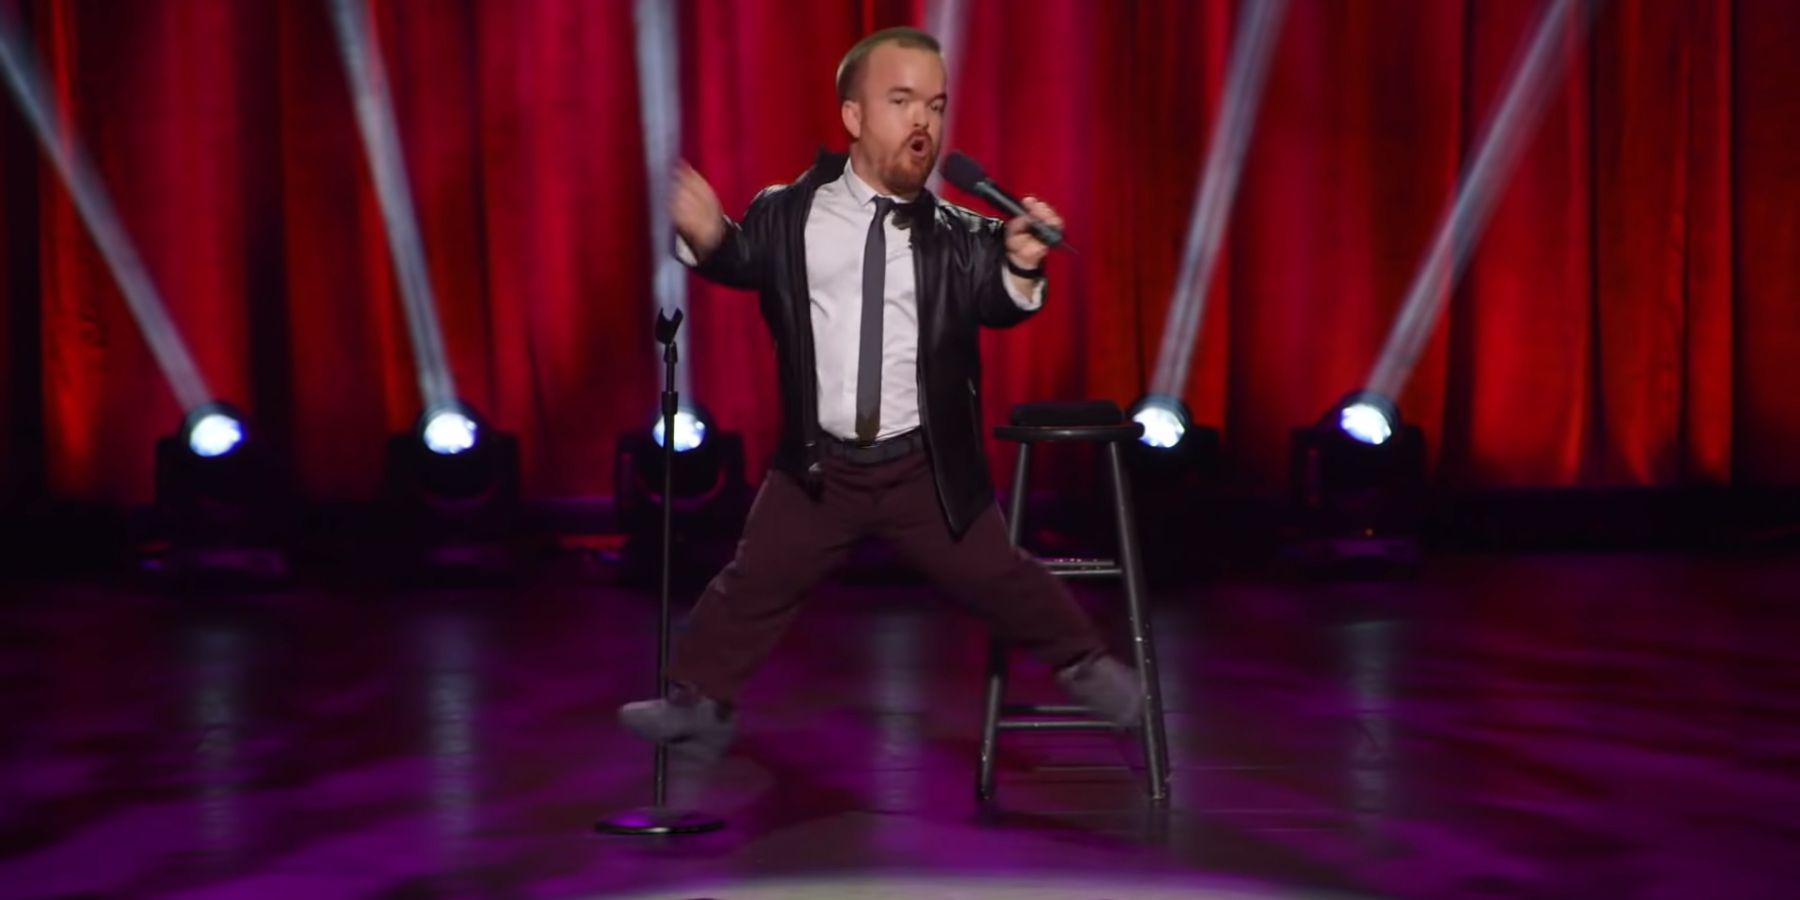 Brad Williams in Daddy Issues jumping into the air holding a mic.